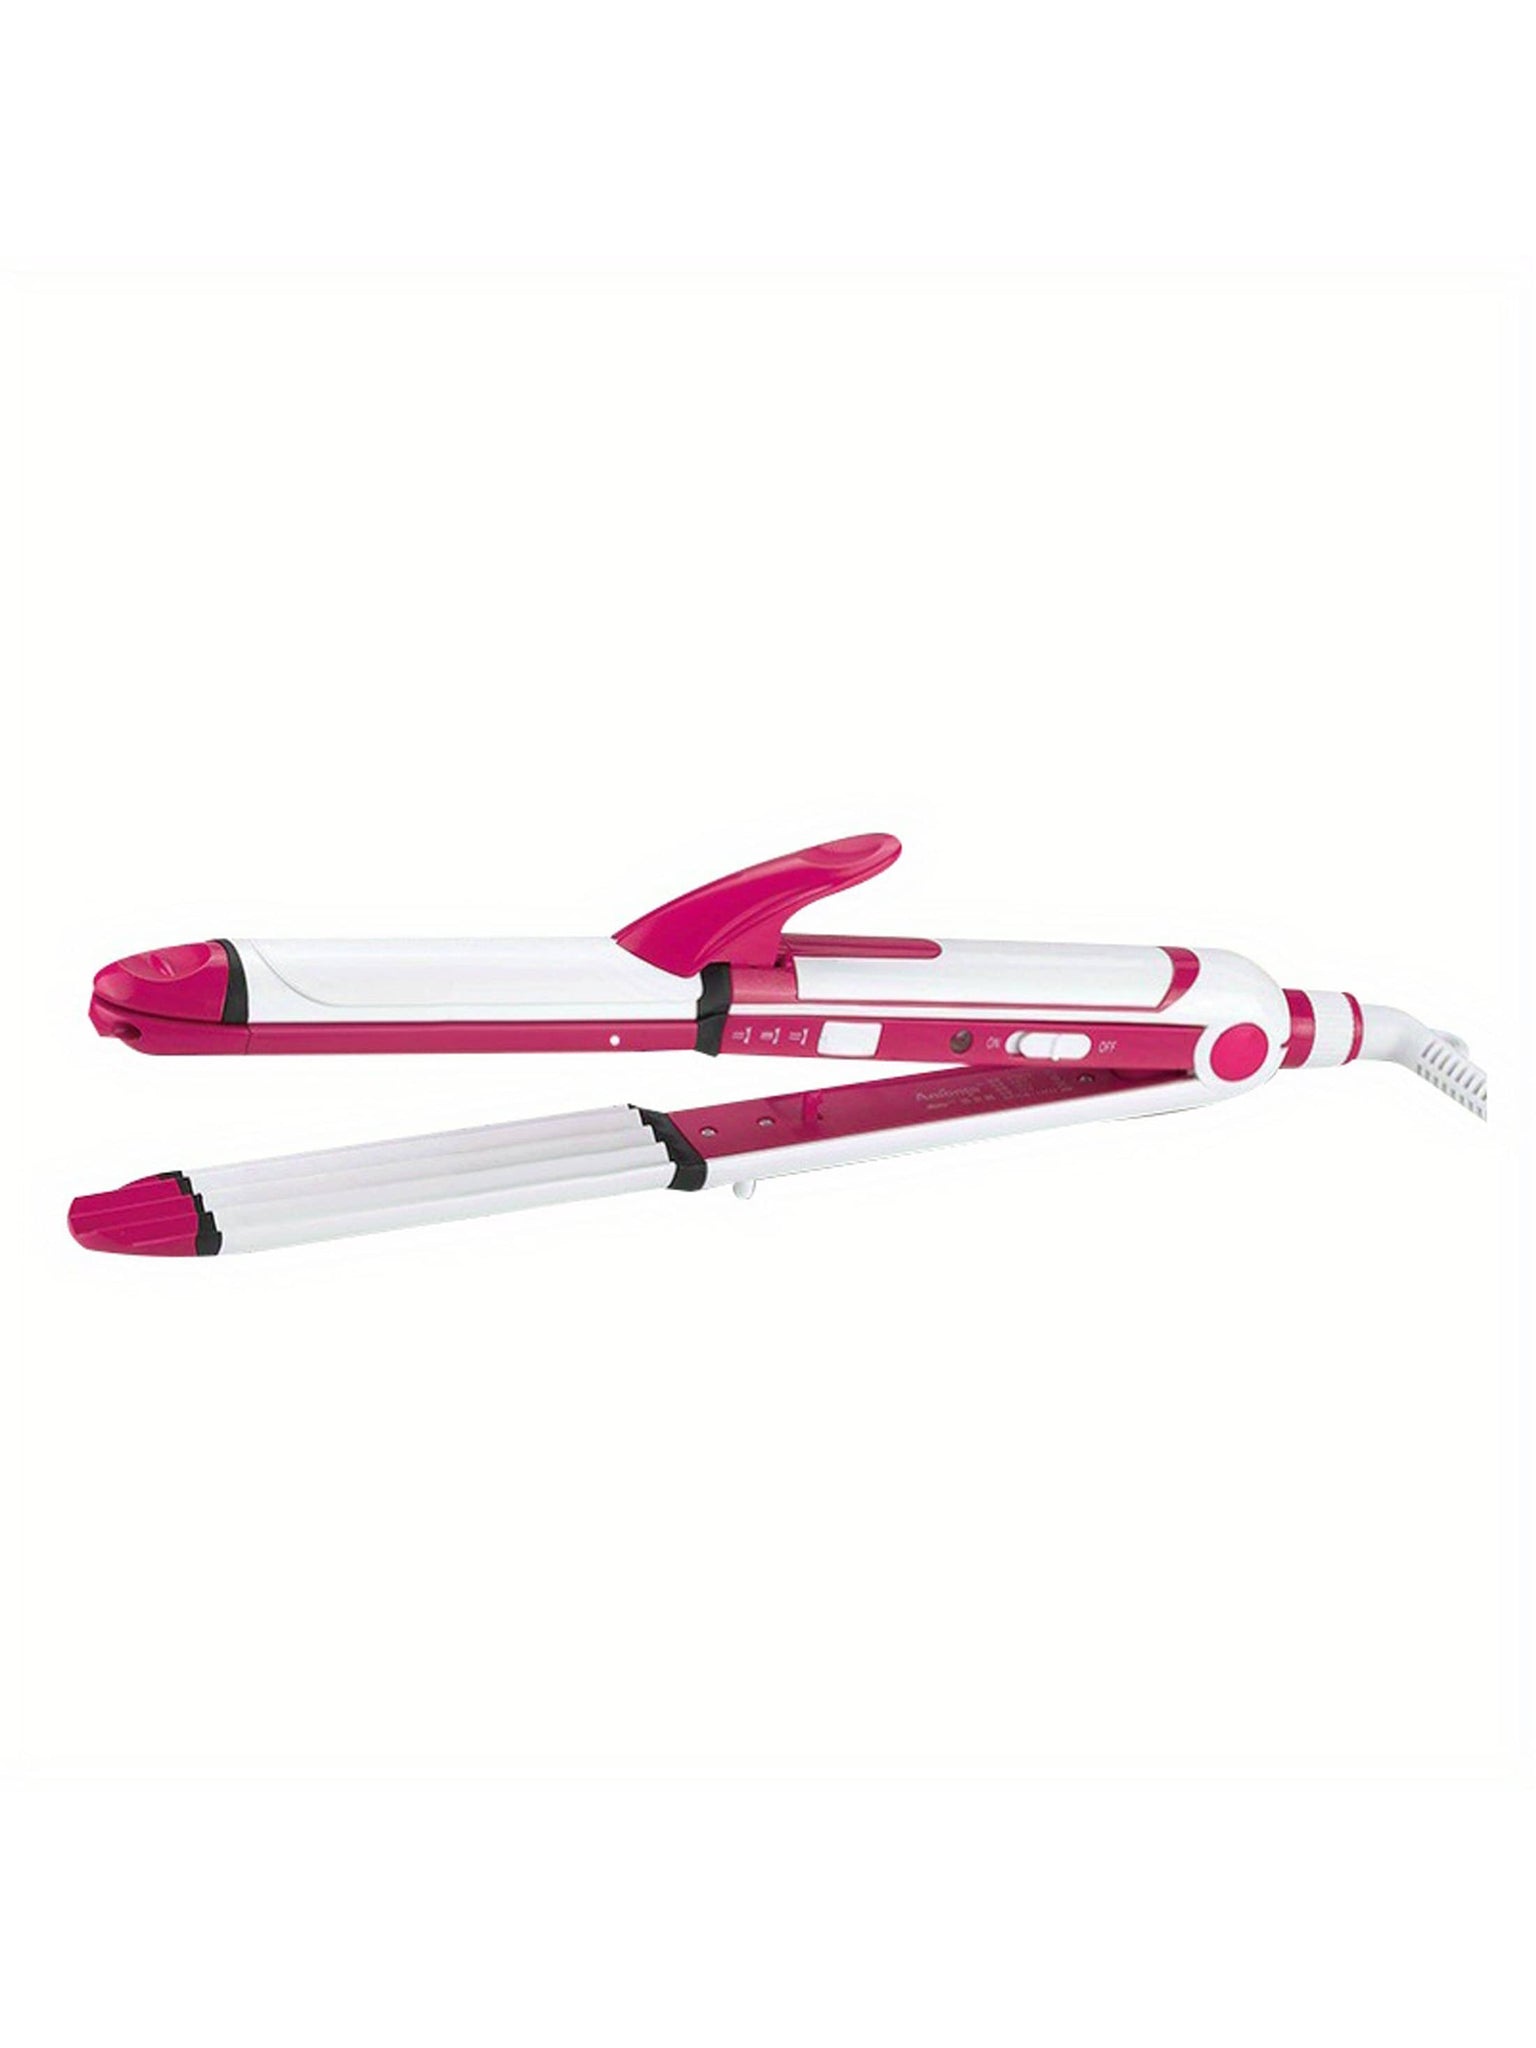 3-in-1 Ceramic Hair Curling Iron: Straighten, Crimp & Style Your Hair Instantly!-Hot Pink-6